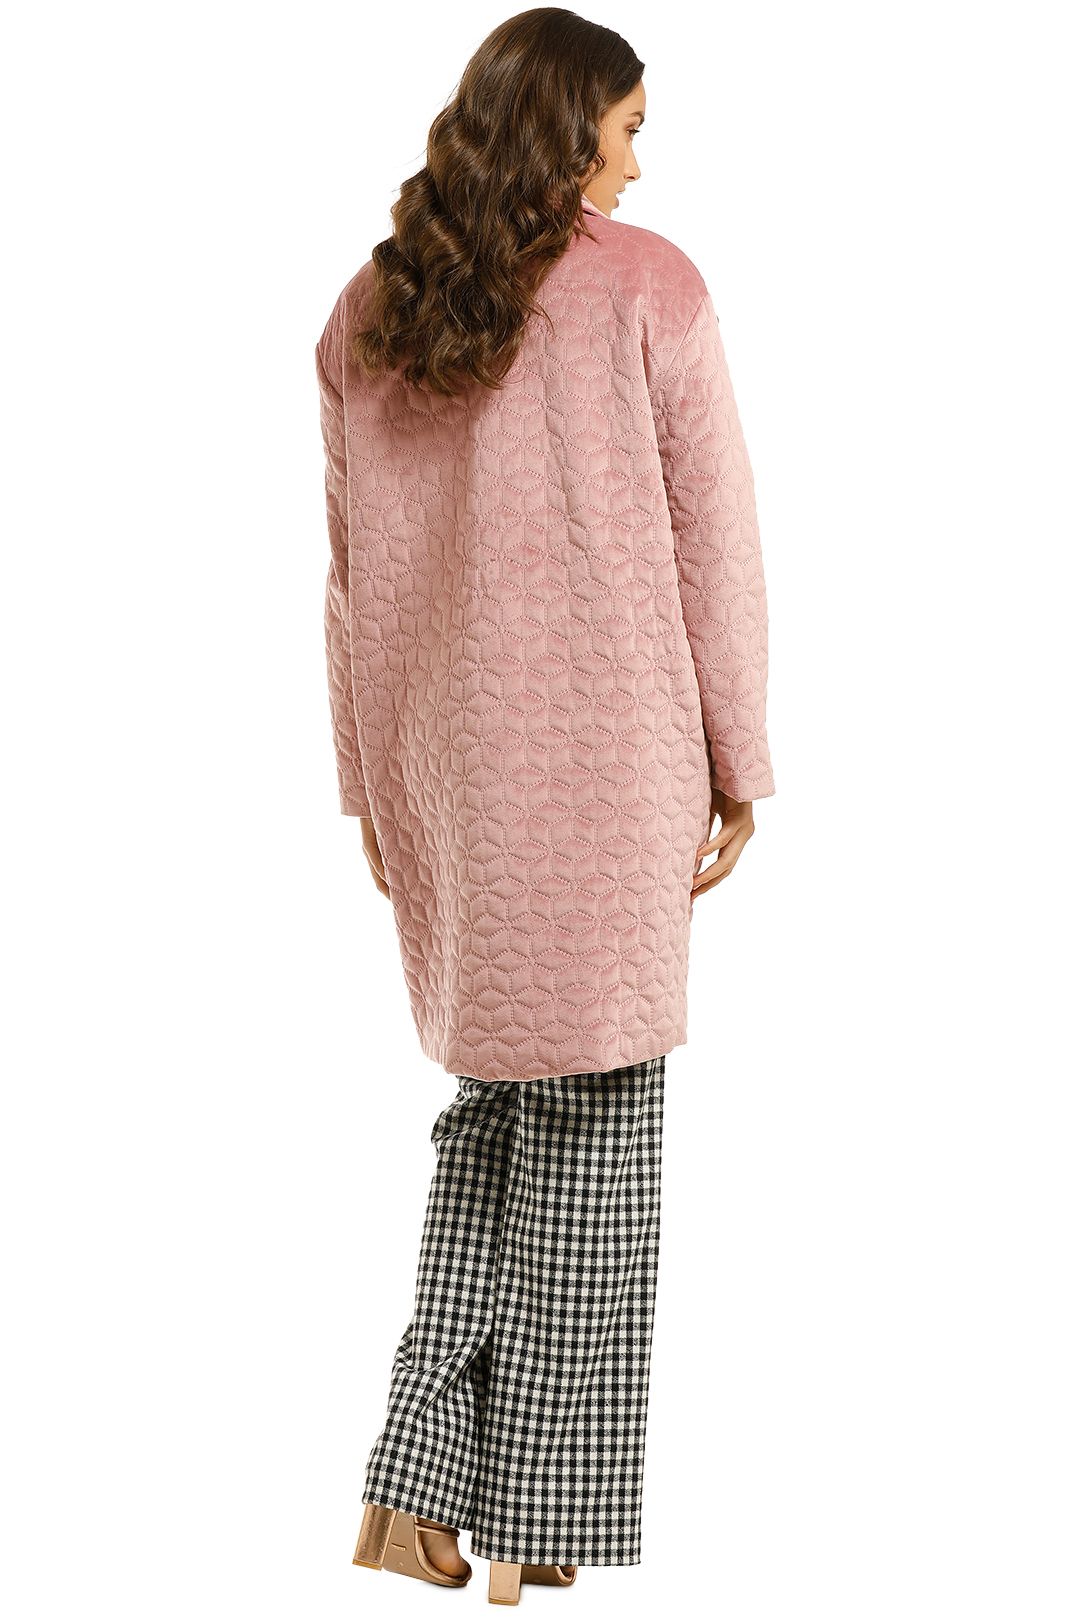 Curate-by-Trelise-Cooper-Little-Quality-Coat-Pink-Back